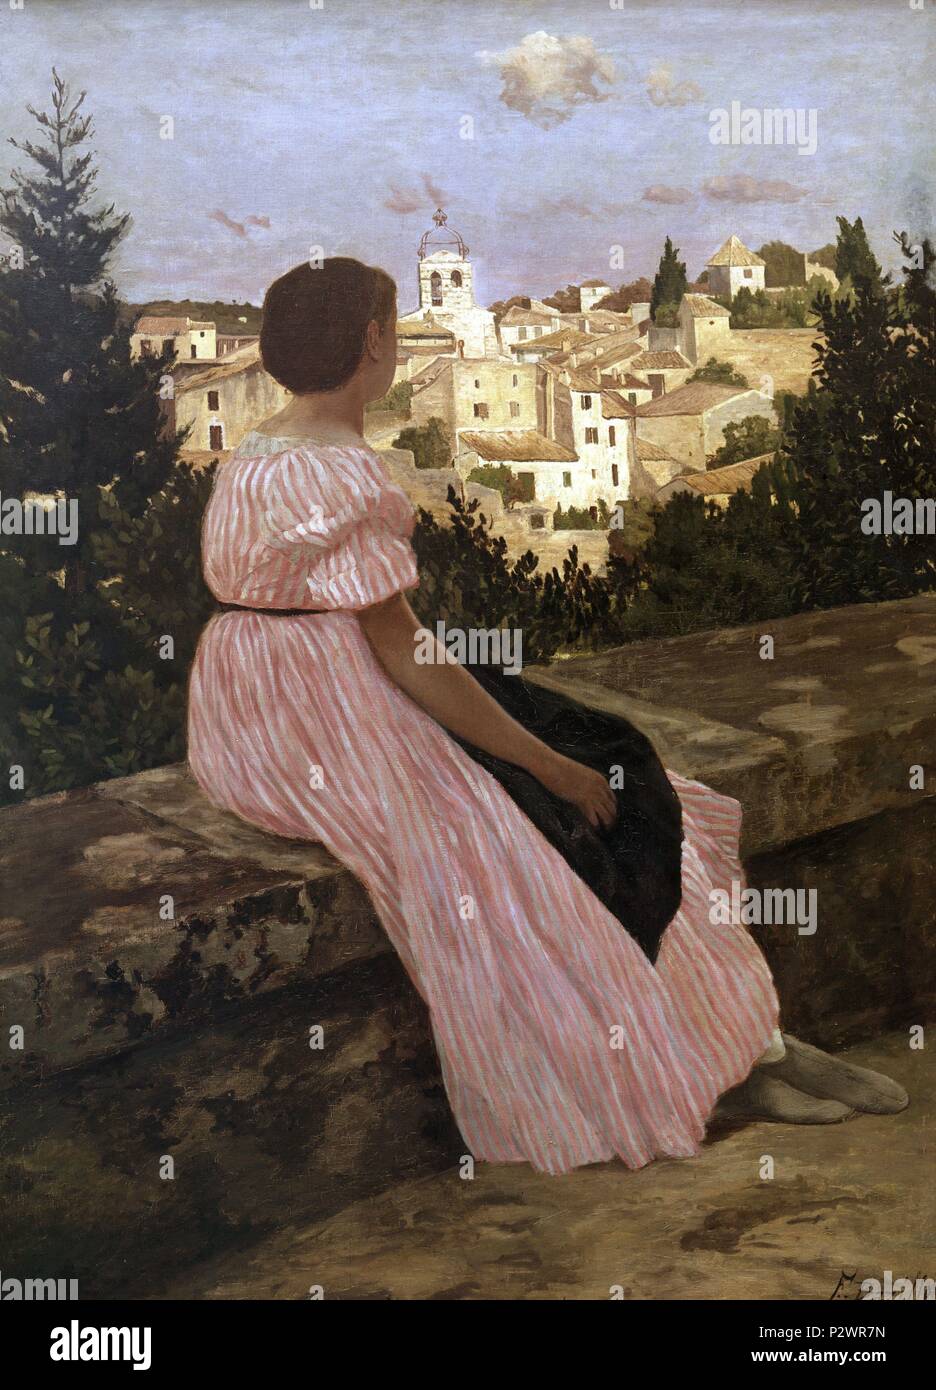 The Pink Dress, or View of Castelnau-le-Lez, Herault -1864 - 147x110 cm - oil on canvas. Author: Frédéric Bazille (1841-1870). Location: MUSEE D'ORSAY, FRANCE. Also known as: EL VESTIDO ROSA. Stock Photo